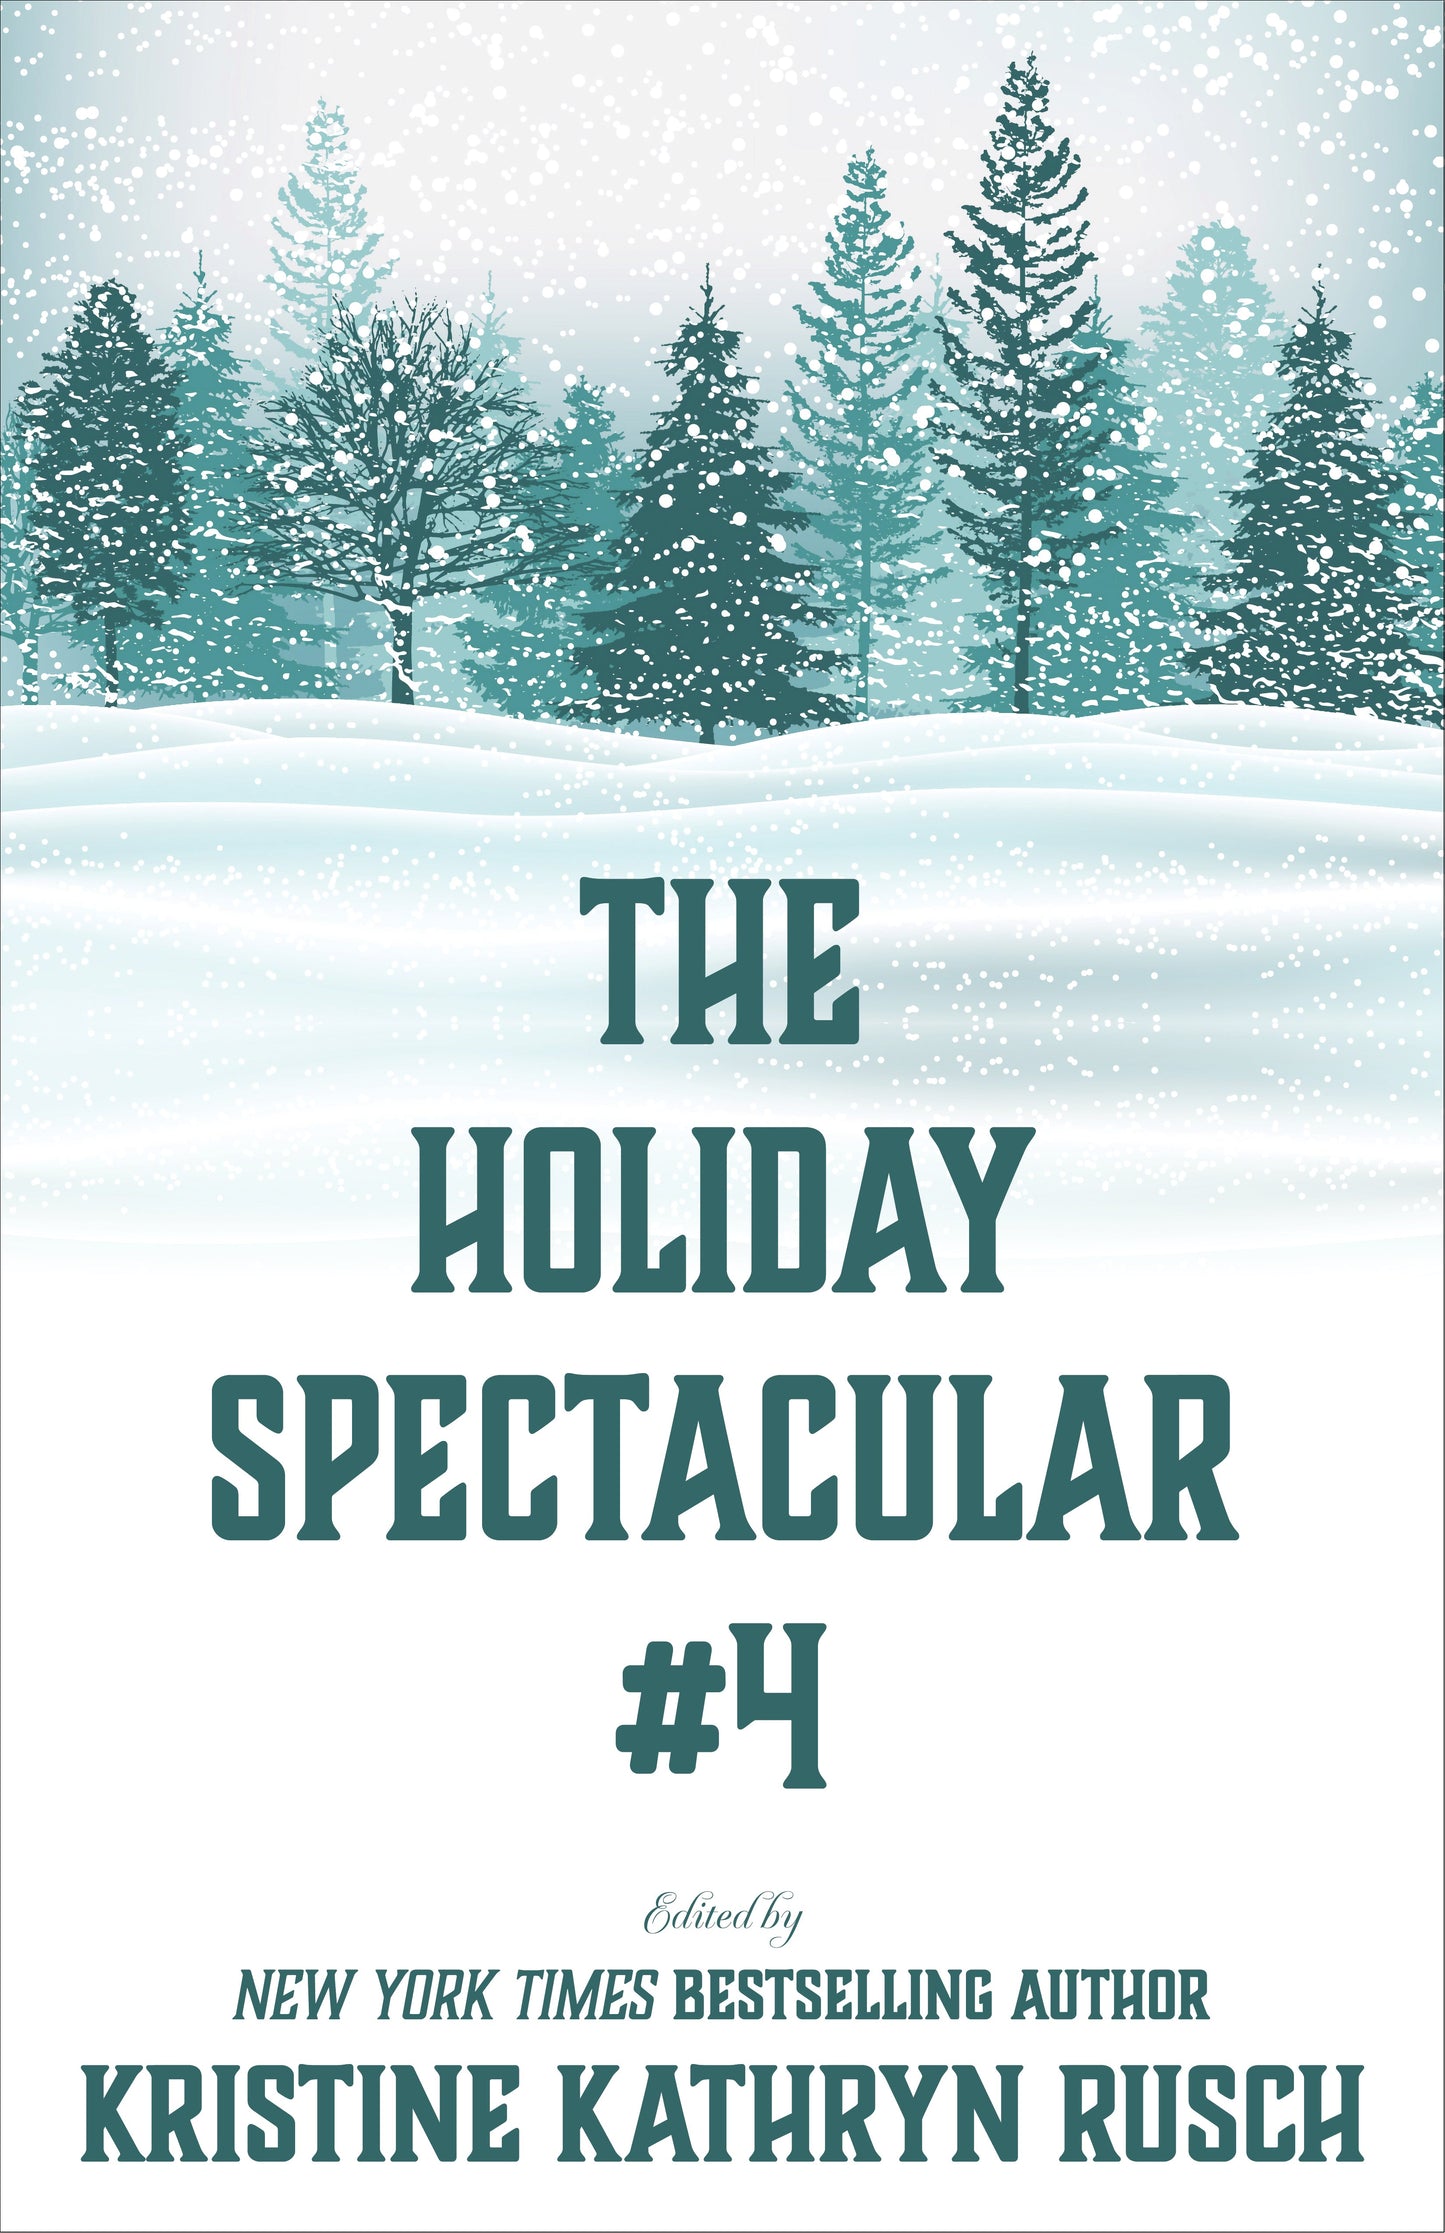 The Holiday Spectacular #4 Edited by Kristine Kathryn Rusch